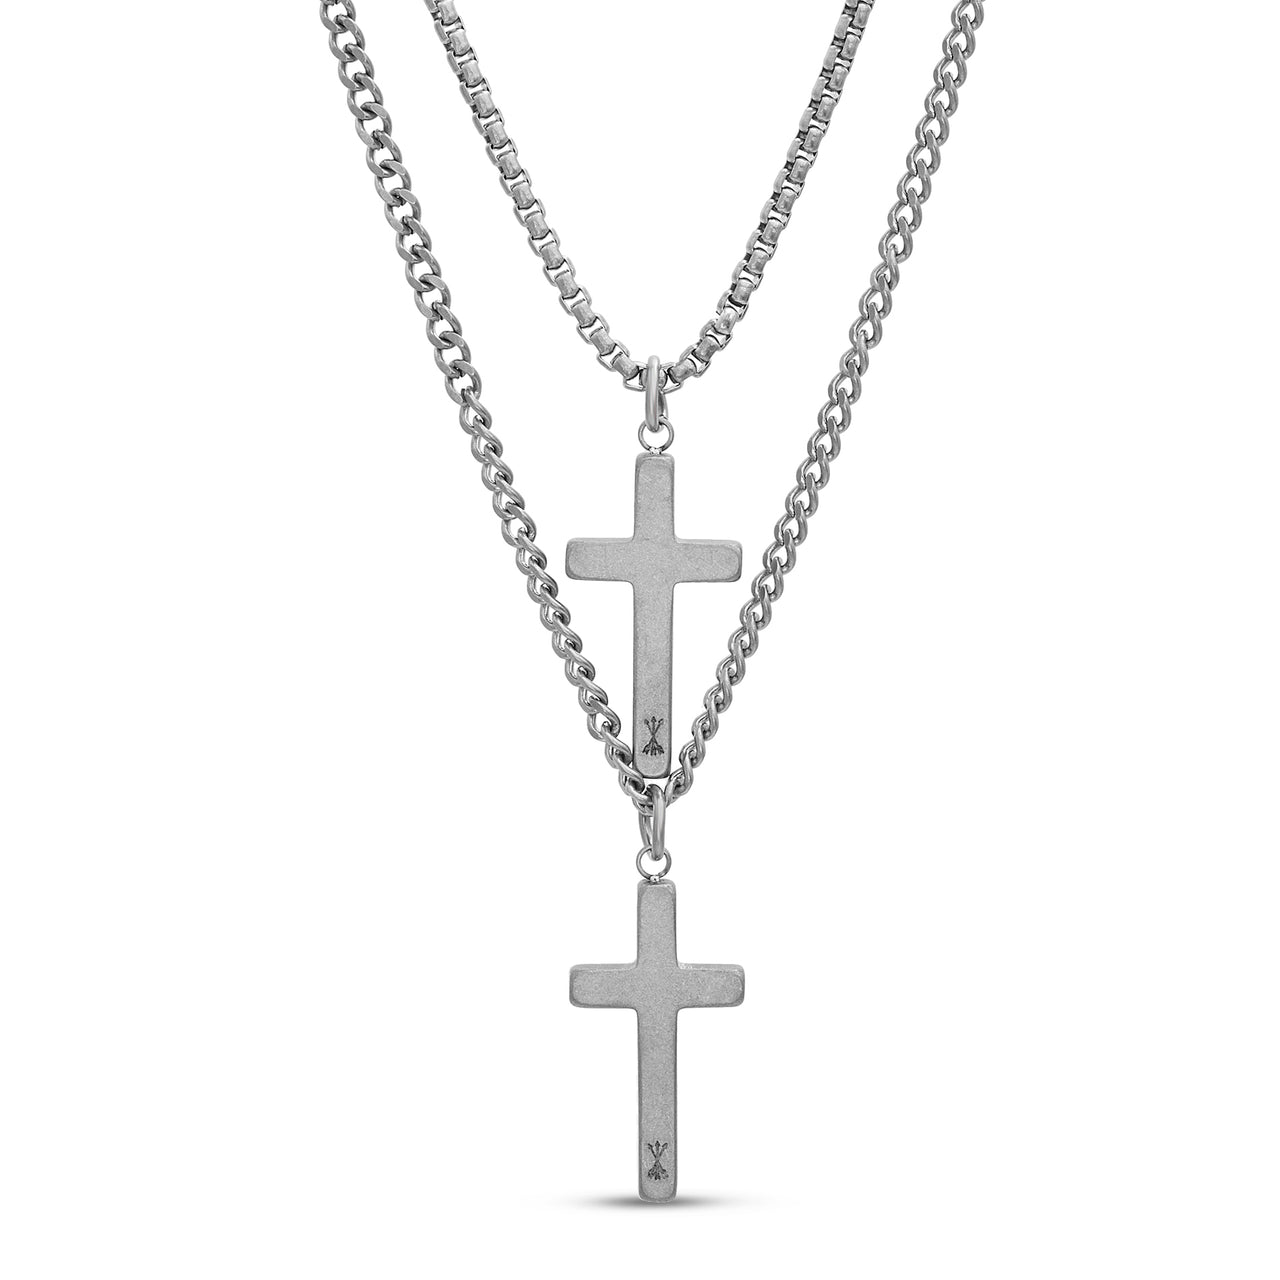 My Bible Stainless Steel Cross Charm Duo Necklace Set